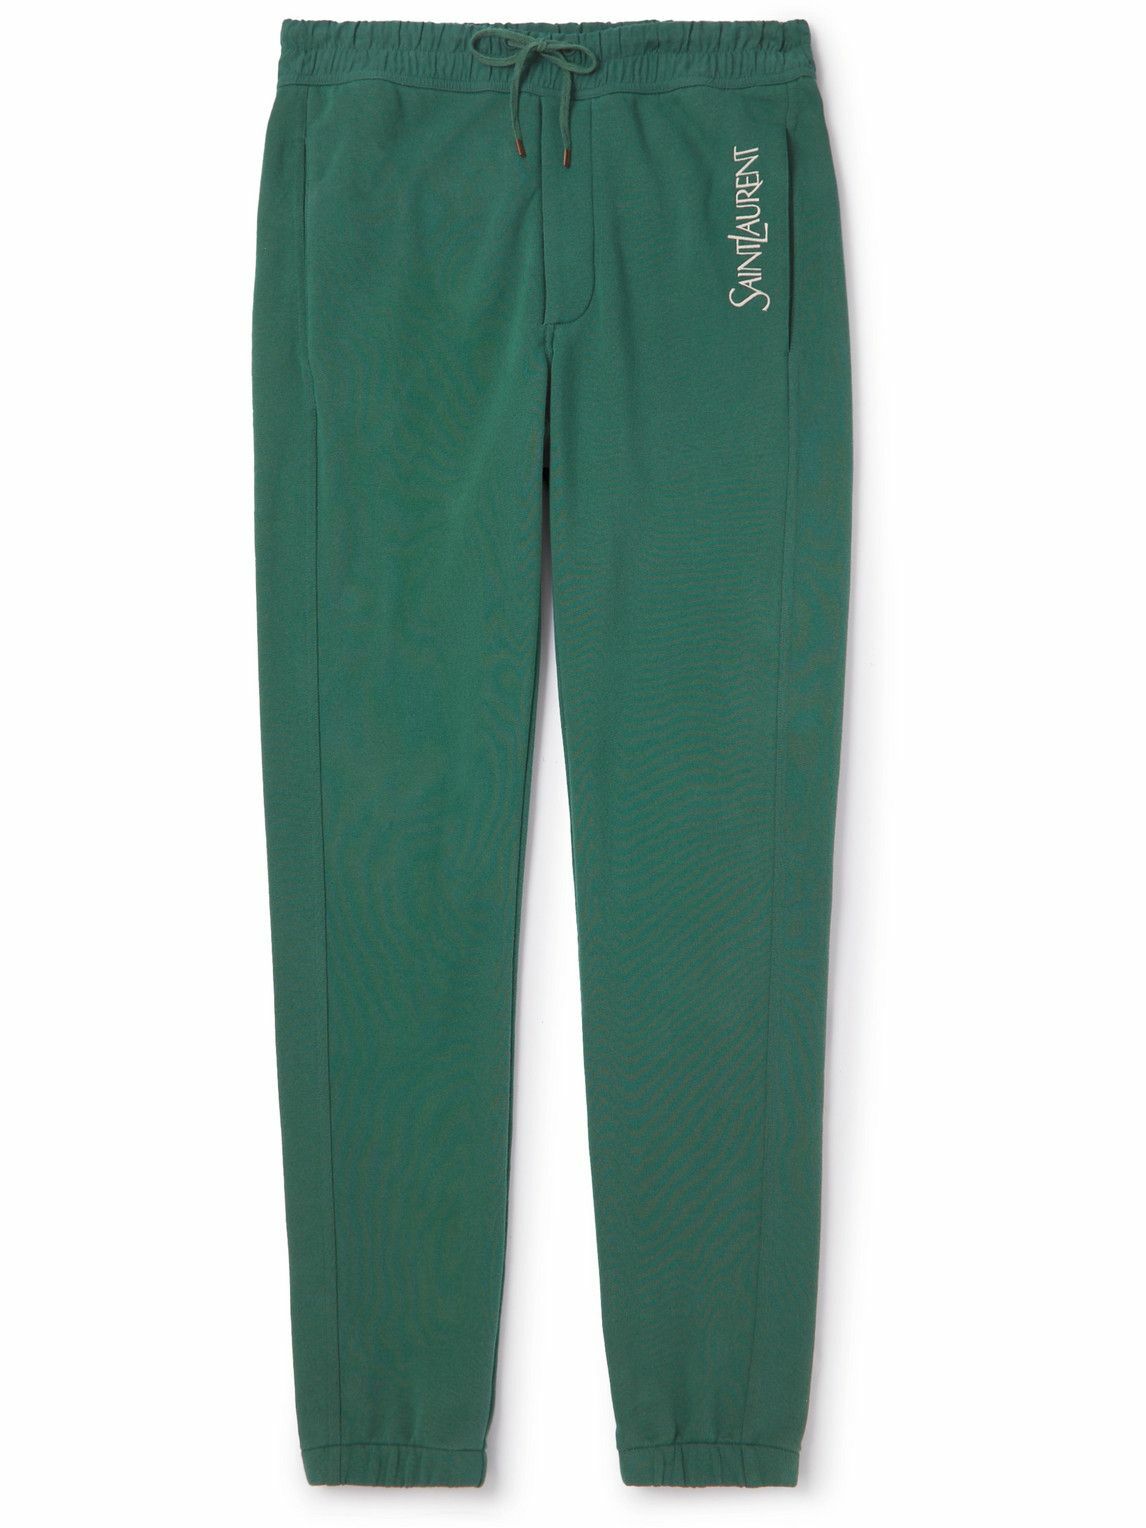 Photo: SAINT LAURENT - Tapered Logo-Embroidered Cotton-Jersey Sweatpants - Green